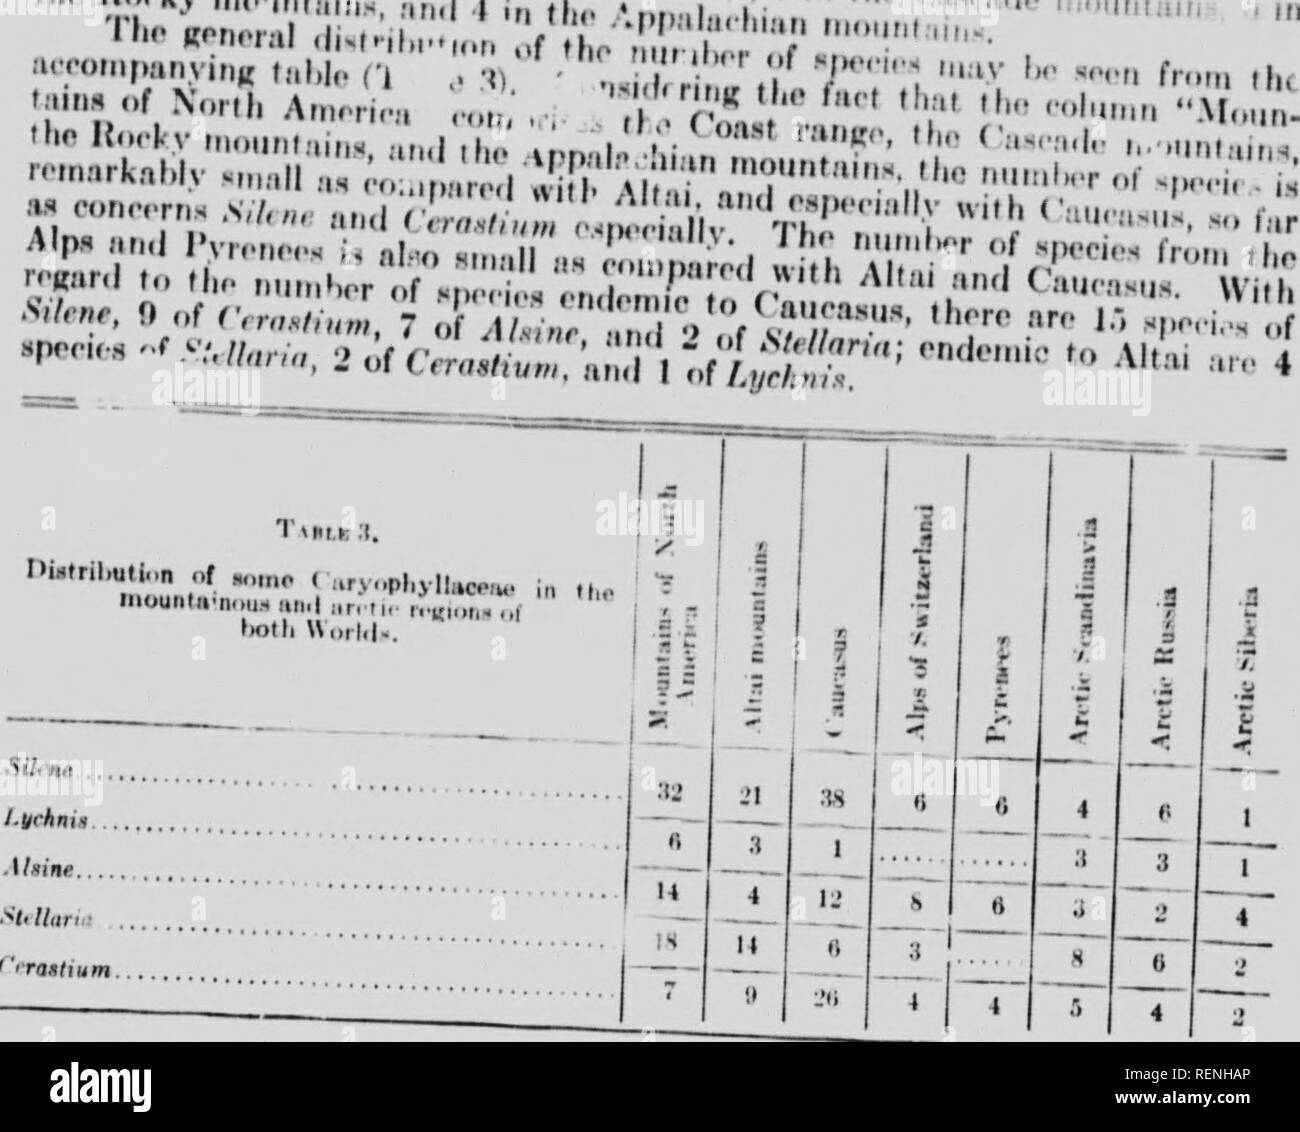 . Botany. Part B [microform] : contributions to the morphology, synonymy, and geographical distribution of Arctic plants. Canadian Arctic Expedition (1913-1918); Canadian Arctic Expedition (1913-1918); Botanique; Plantes; Botany; Botany. Arrtir n,âh: Grvgrophical IH.lni ,lion 1 the an â¢ C.xl .â¢ill Silent. -^  4 f&gt; 1 3 3 1 . â . .1 O 4 H 6 â J a 4 U And as may ho sorn from (ho same tahlo n'ni.h. â¢!&gt; .k Pountam.s to ,ho arctic Flora is vcrv &quot;rm.ll s, M'' * . '. ' 'â¢'Â»&quot;&quot;&quot;Â«&quot;'Â» &quot;f &quot;'-Â«Â« the Caryophyllaroao are quite fr.MHicnth ,',.,;',; ''. '^ &quot Stock Photo